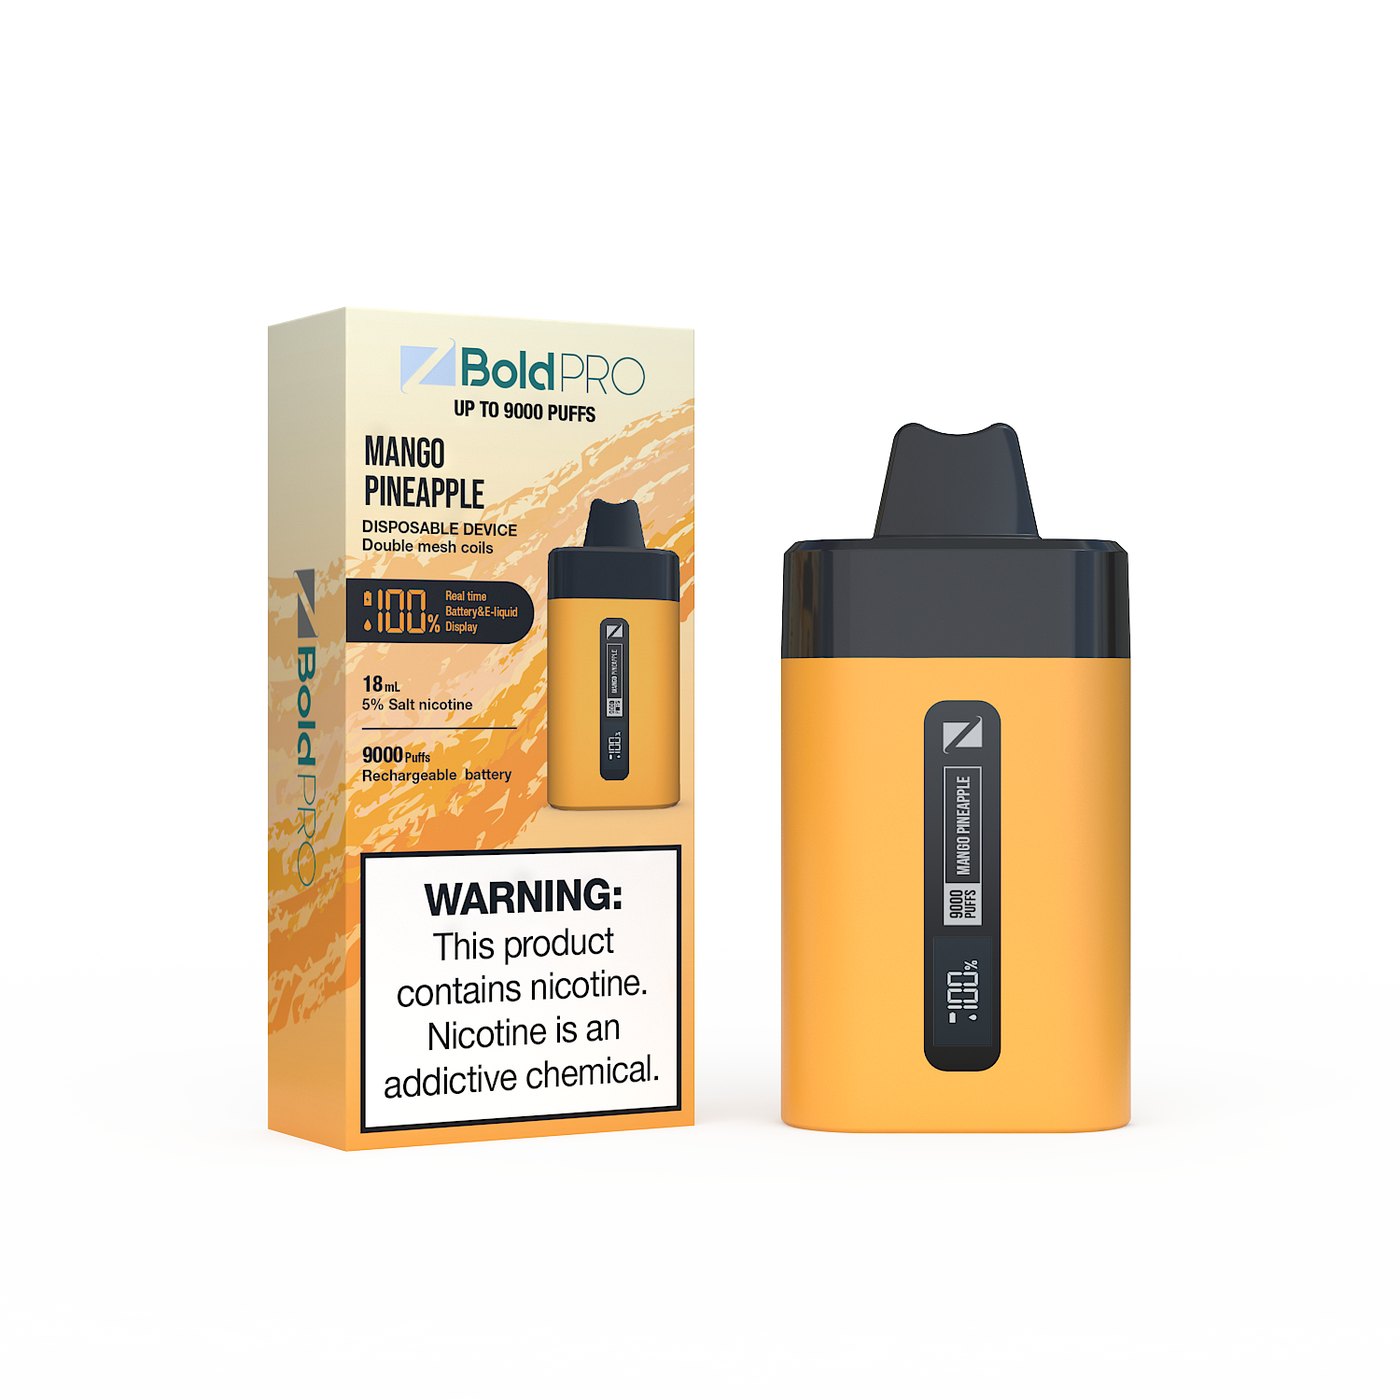 Z Bold Pro - Mango Pineapple - 9000 Puffs - LED Screen with Juice and Battery Indicator